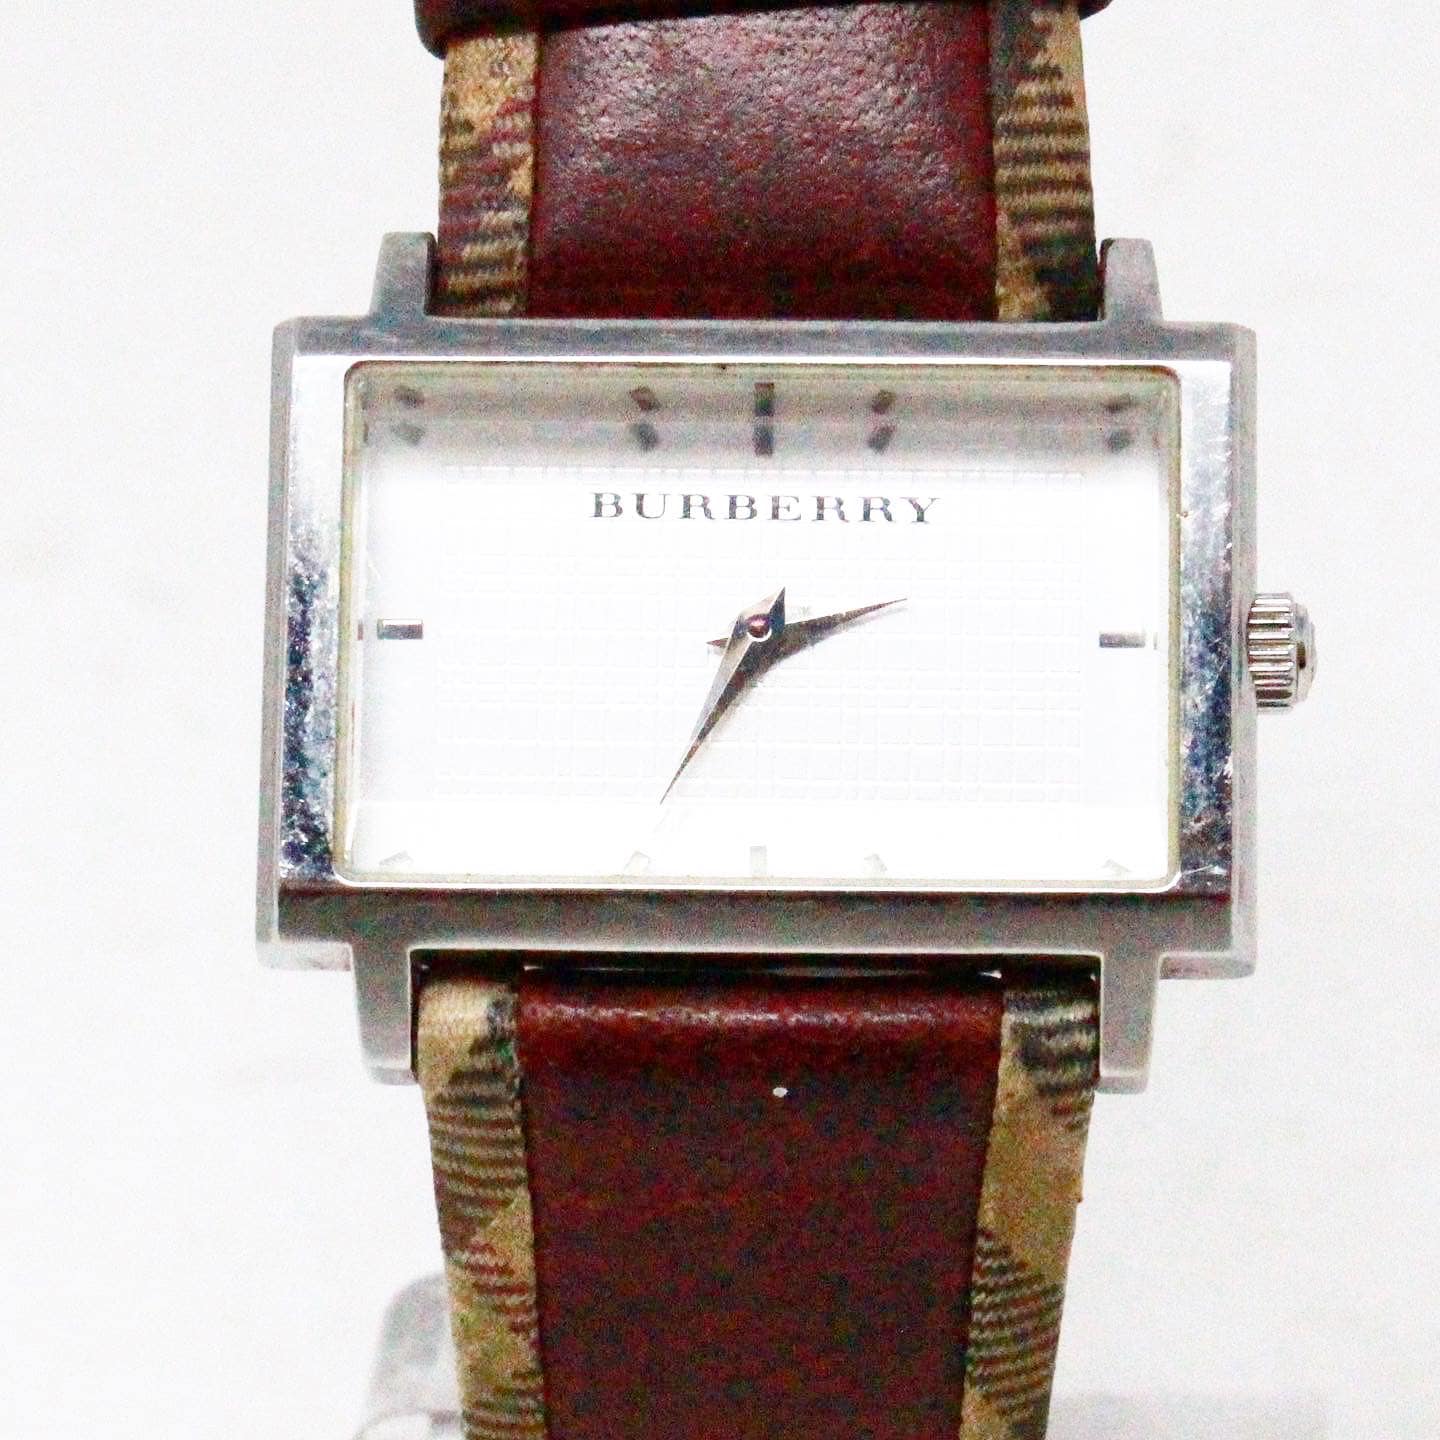 BURBERRY #42849 Leather Strap Watch 2